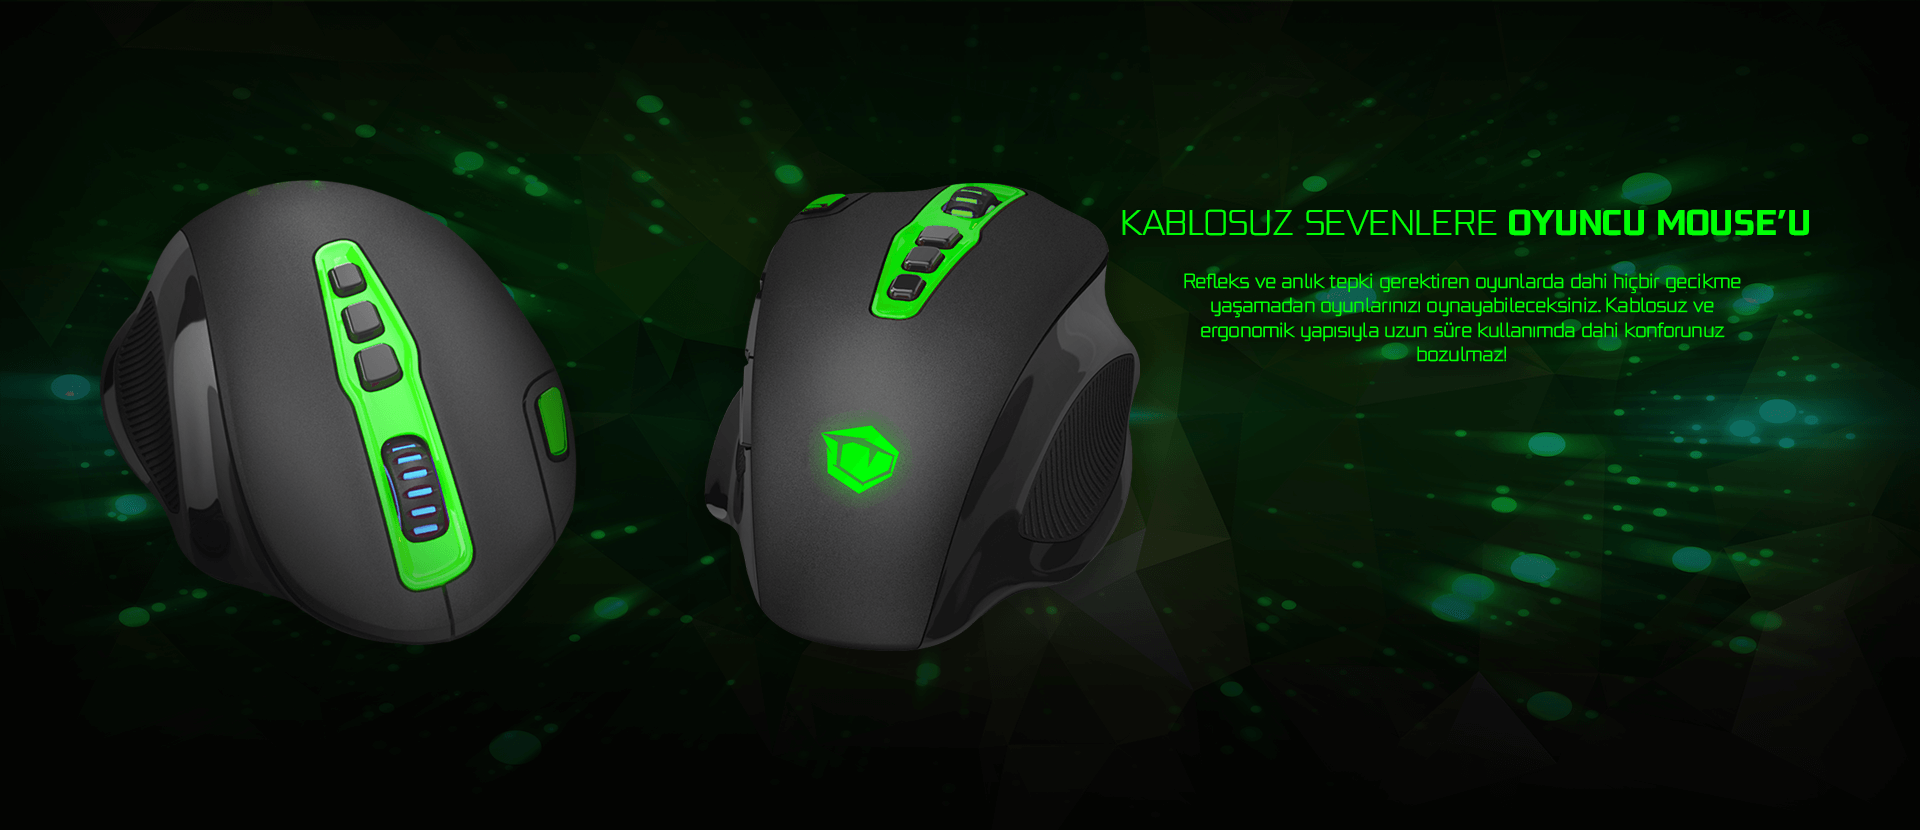 Gaming Mouse model v7. G6 Gaming Mouse Китай программа. Pwnage Stormbreaker Magnesium Wireless Gaming Mouse.